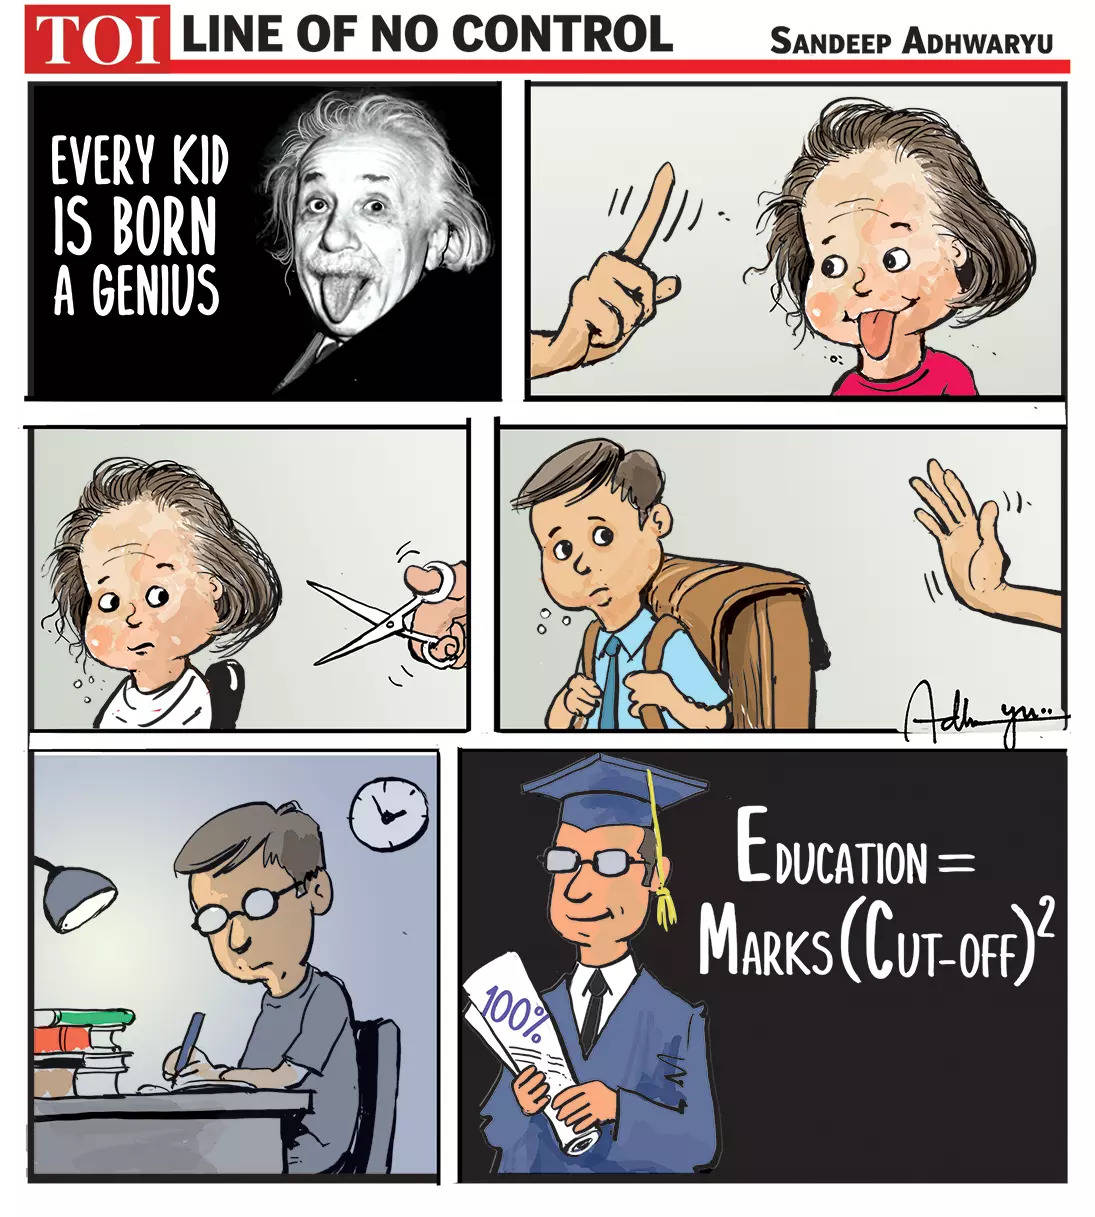 Every kid is a born genius | Times of India Mobile